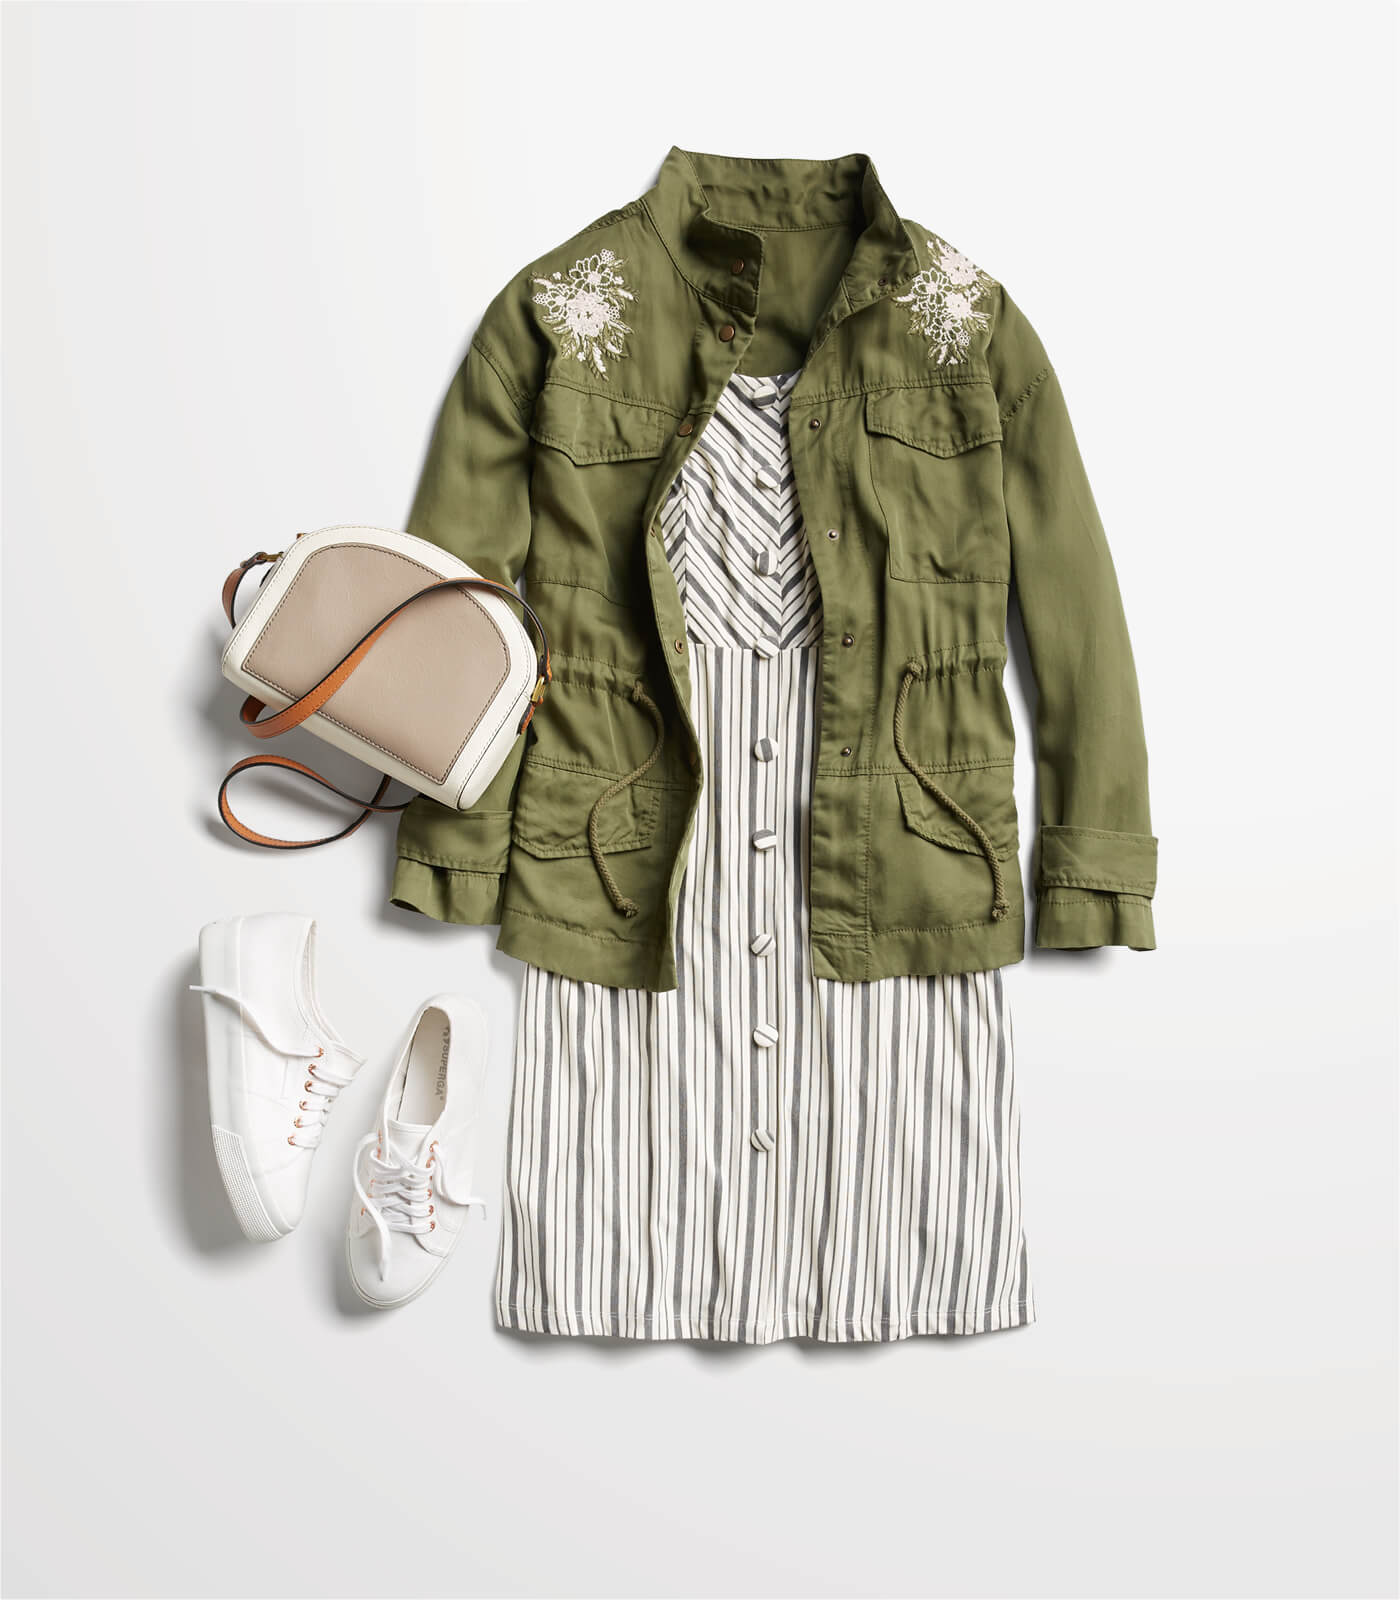 striped dress with cargo jacket and sneakers